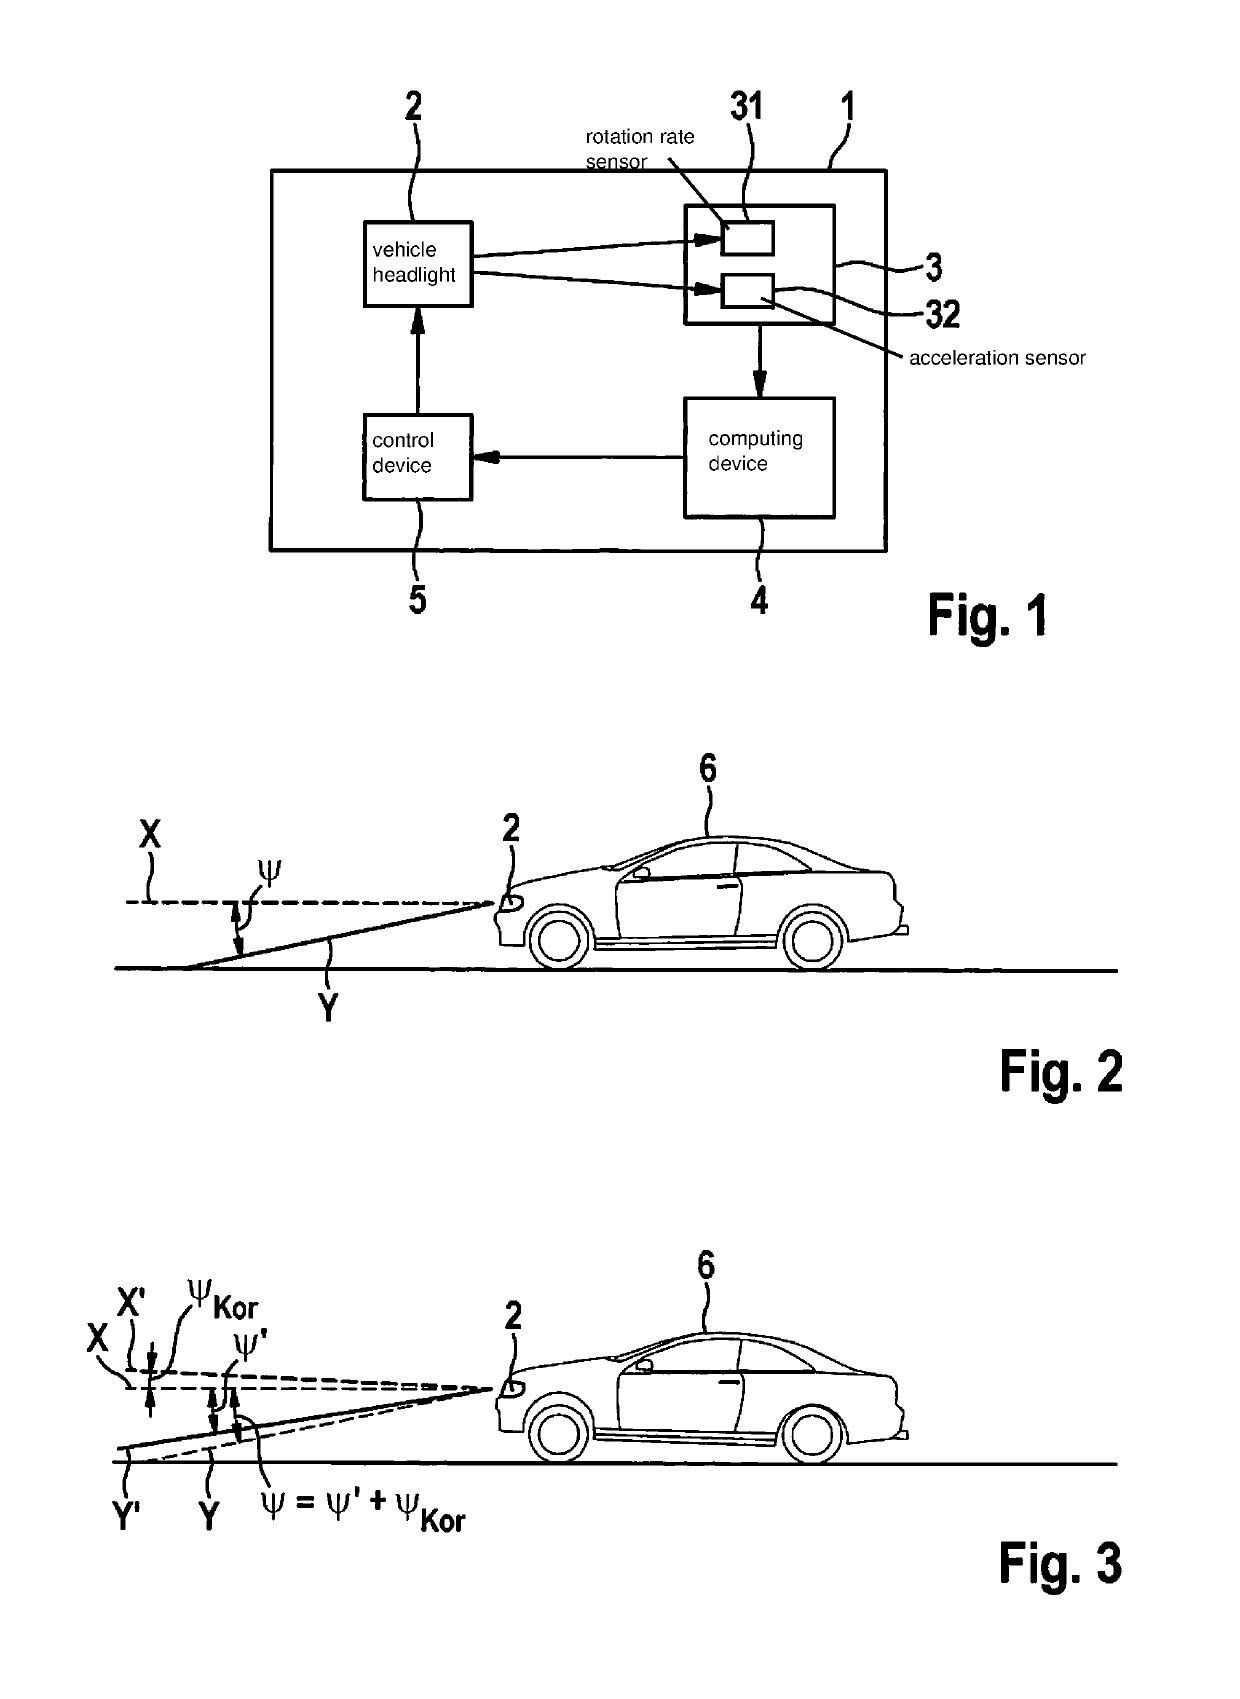 Method and system for the automatic adjustment of an angle of inclination of a vehicle headlight